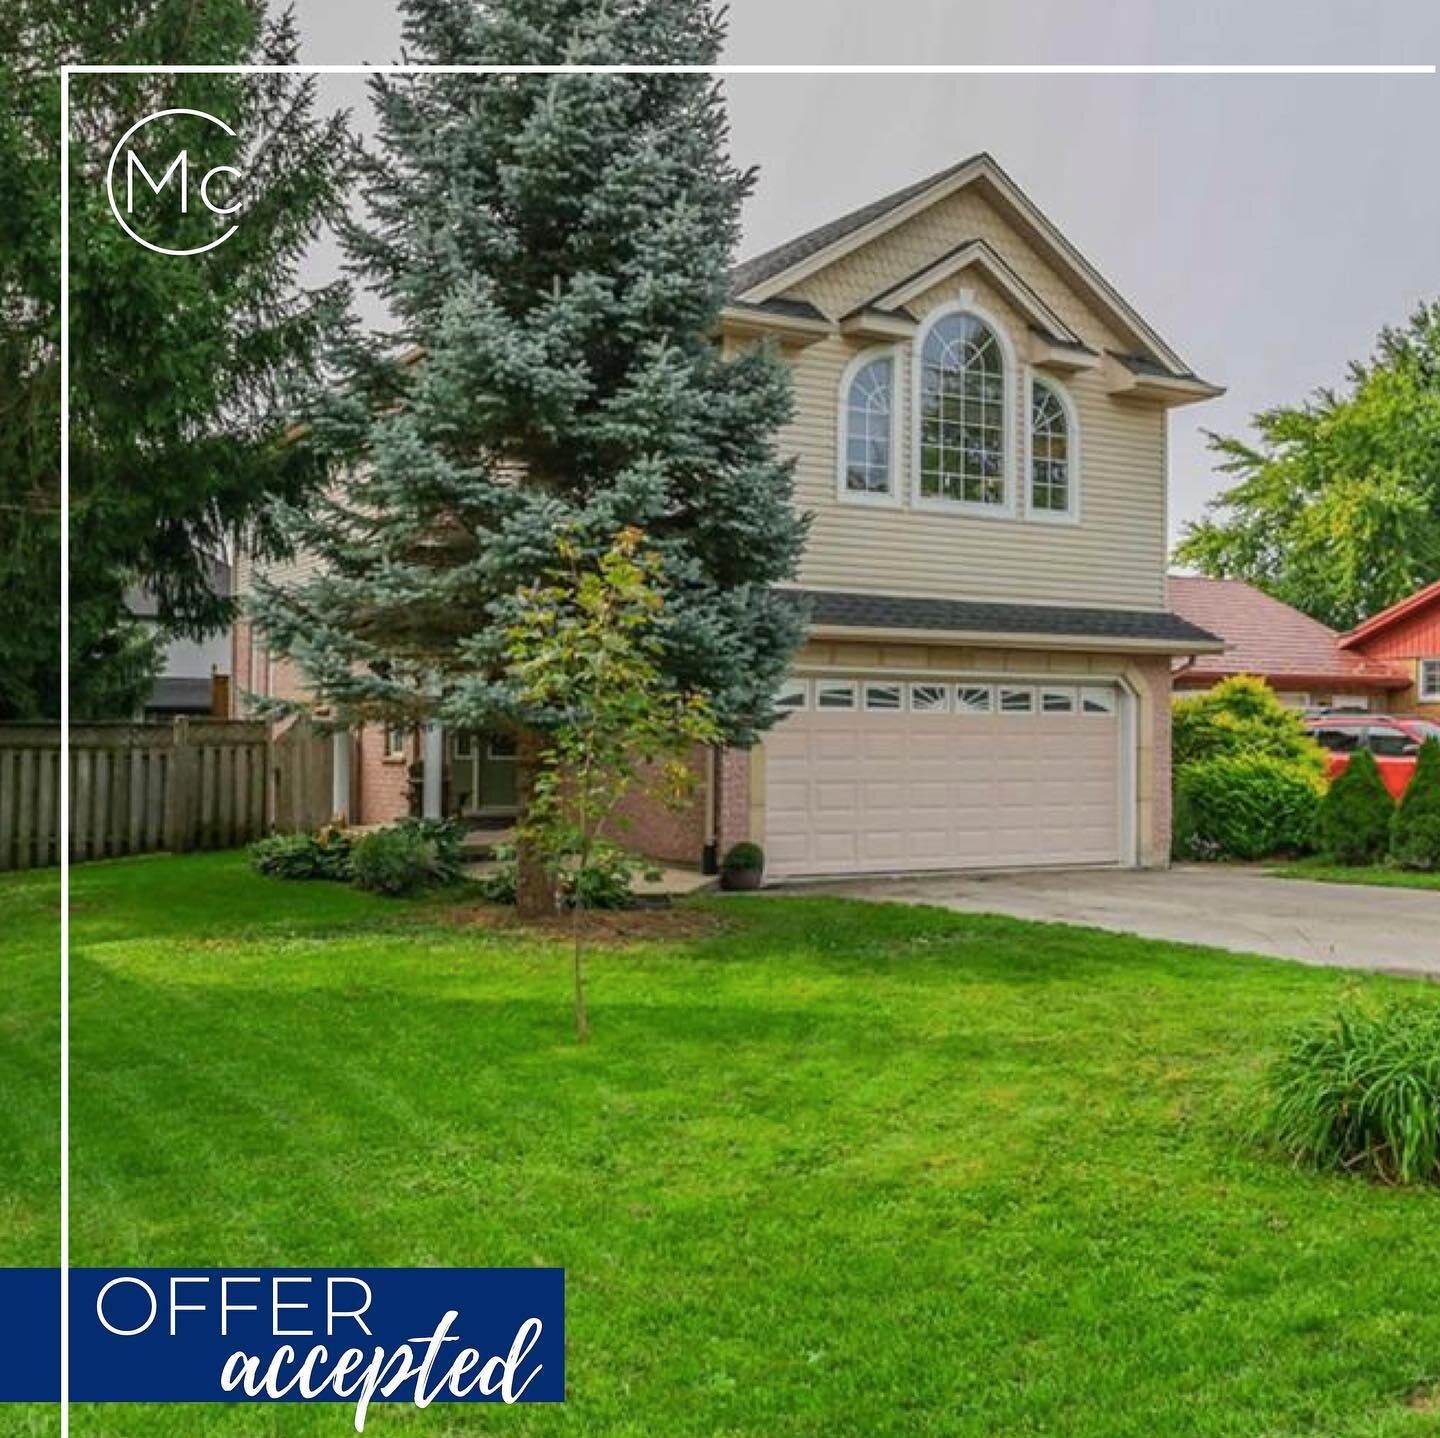 Offer accepted - This one is all yours now.

Your persistence in this market and quick action helped you snag this lovely home for yourself. I am excited to see you make it your own and enjoy your time with your kids here. It was such a pleasure to g